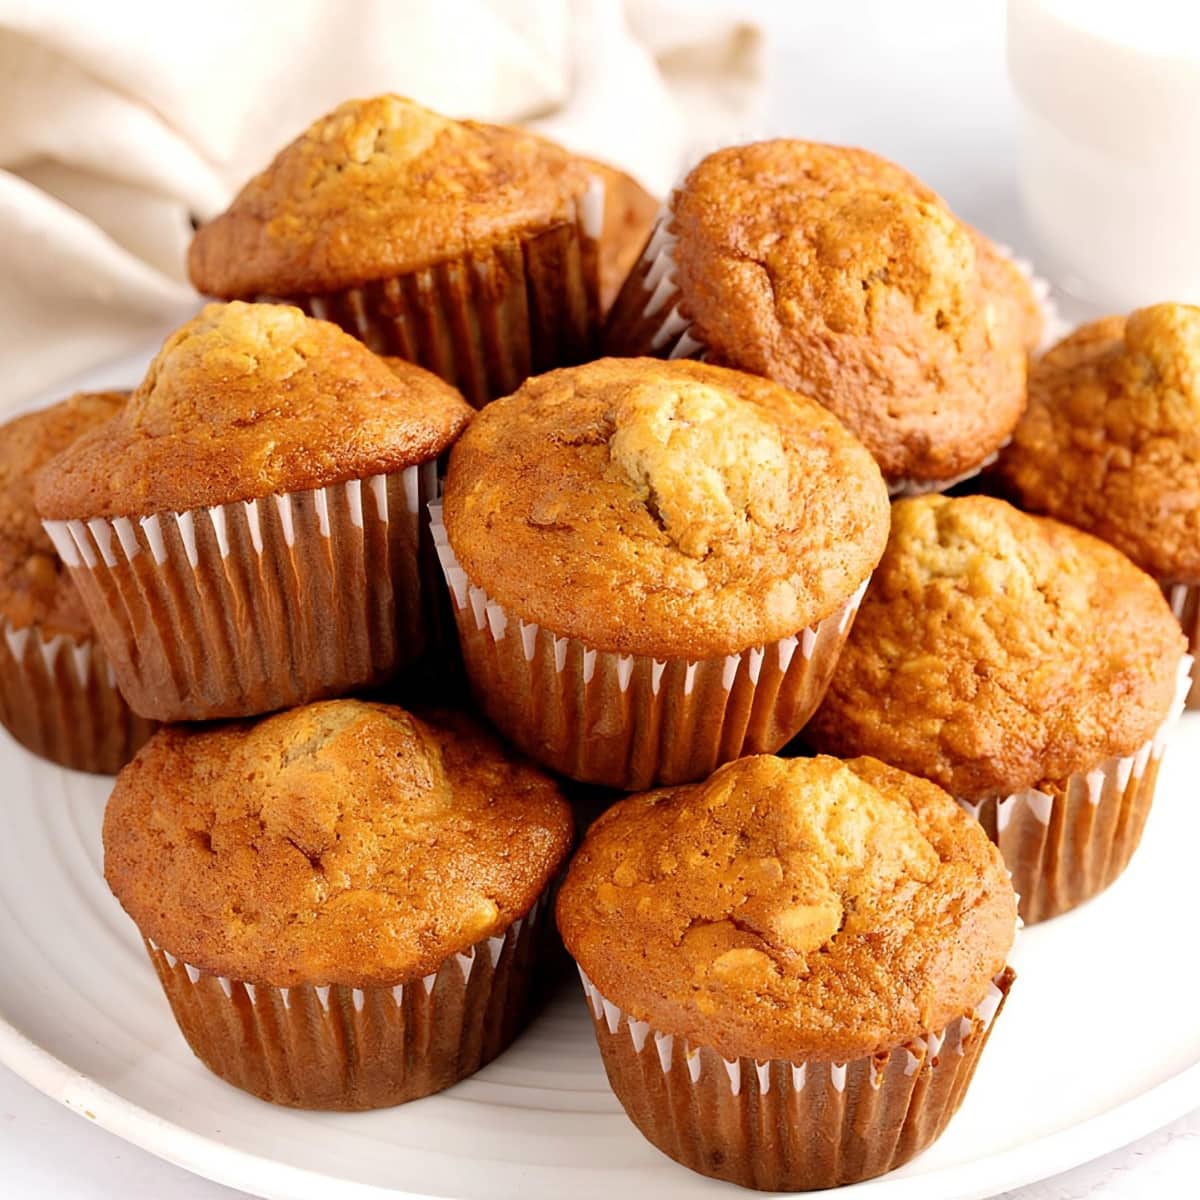 Bunch of Banana Oat Muffins on a Round Plate